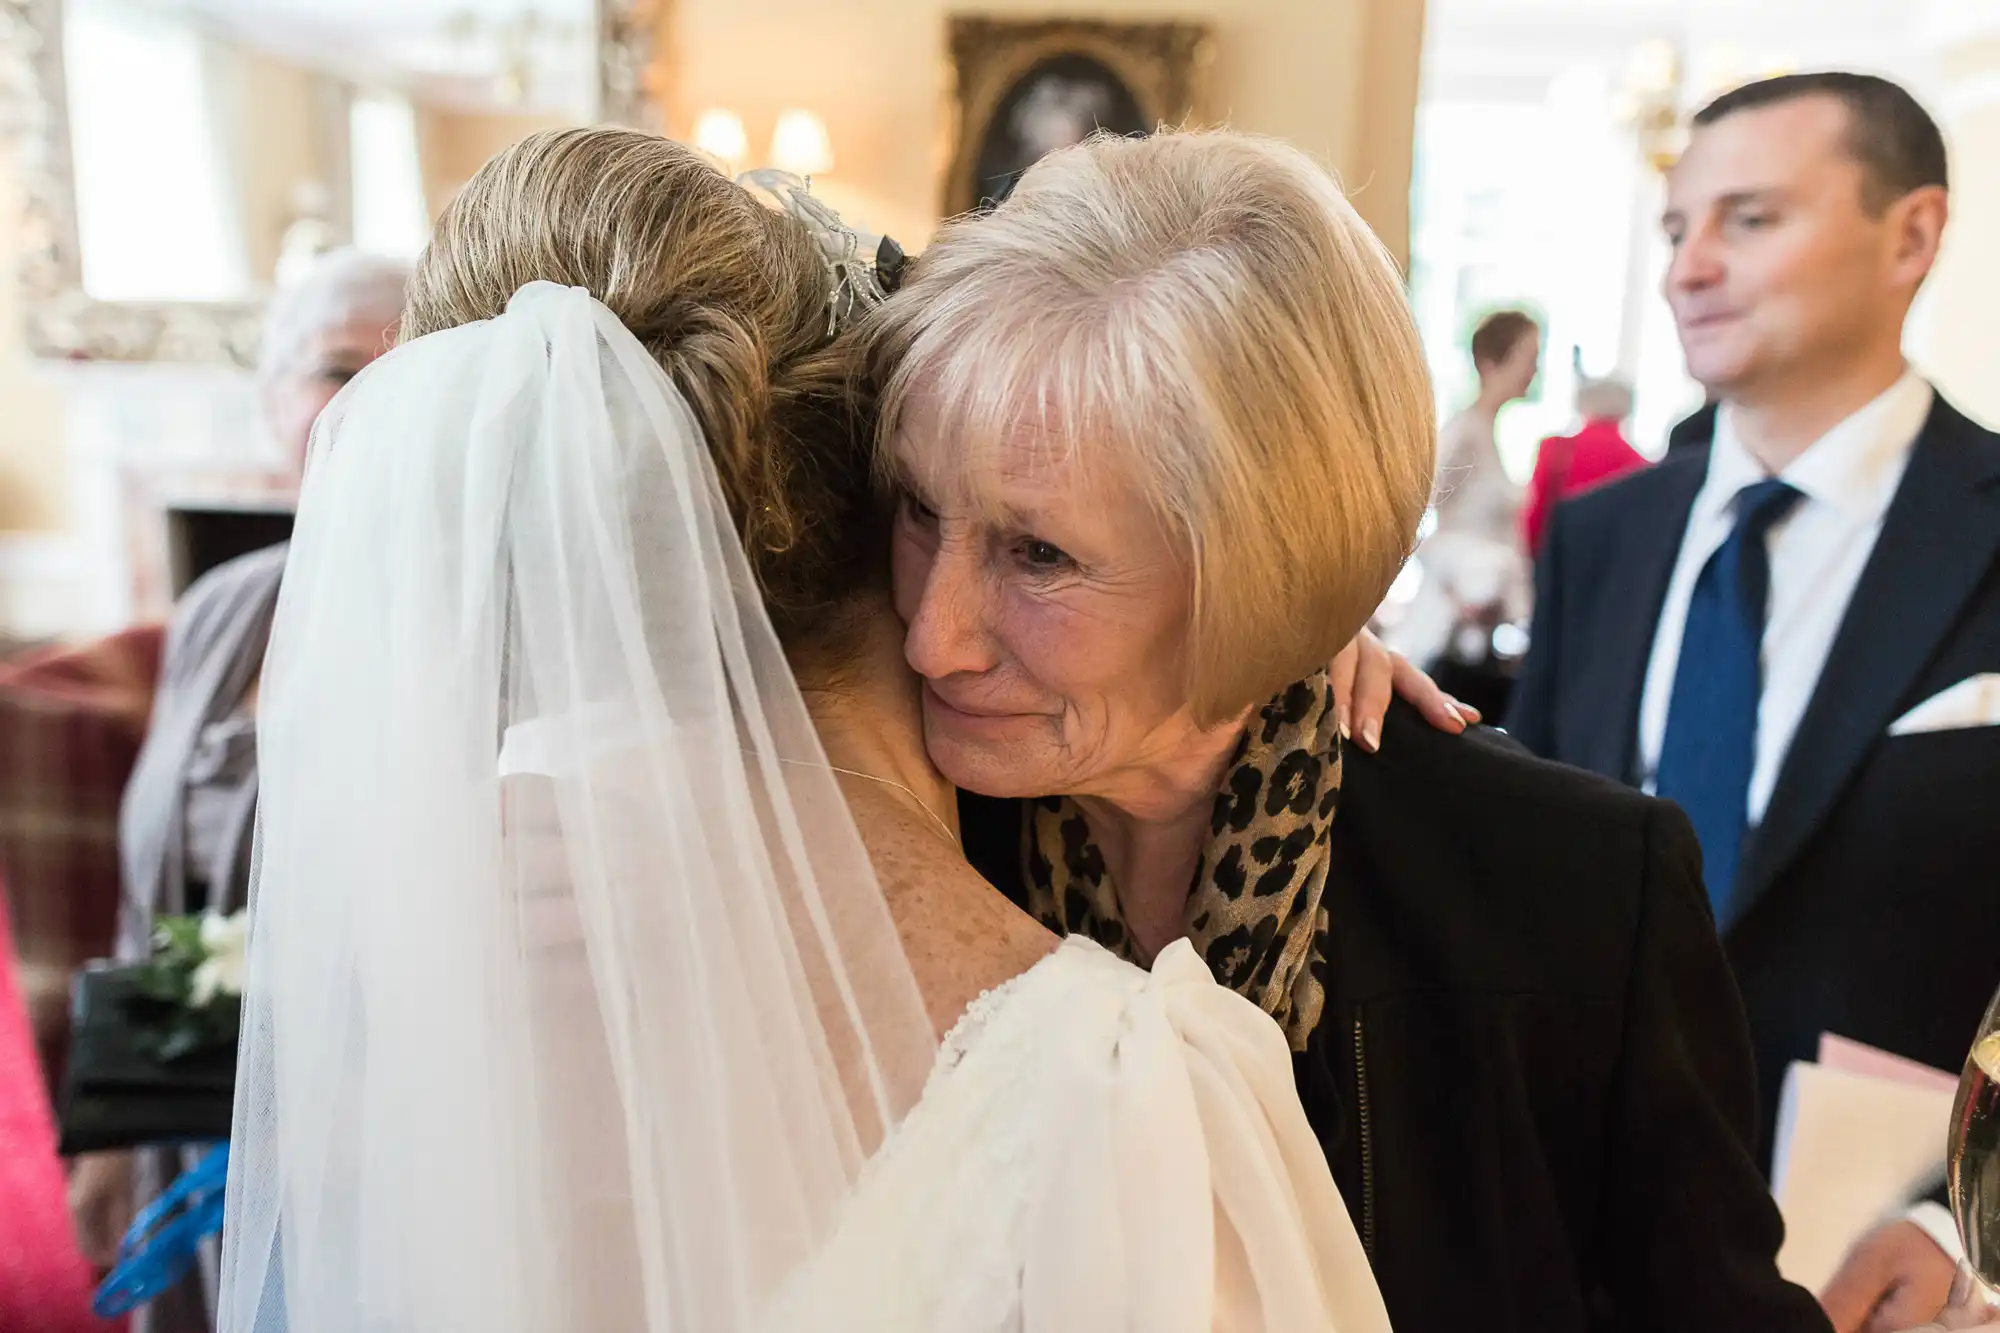 An older woman with a tender expression hugs a bride in a white dress and veil, surrounded by guests at a wedding reception.